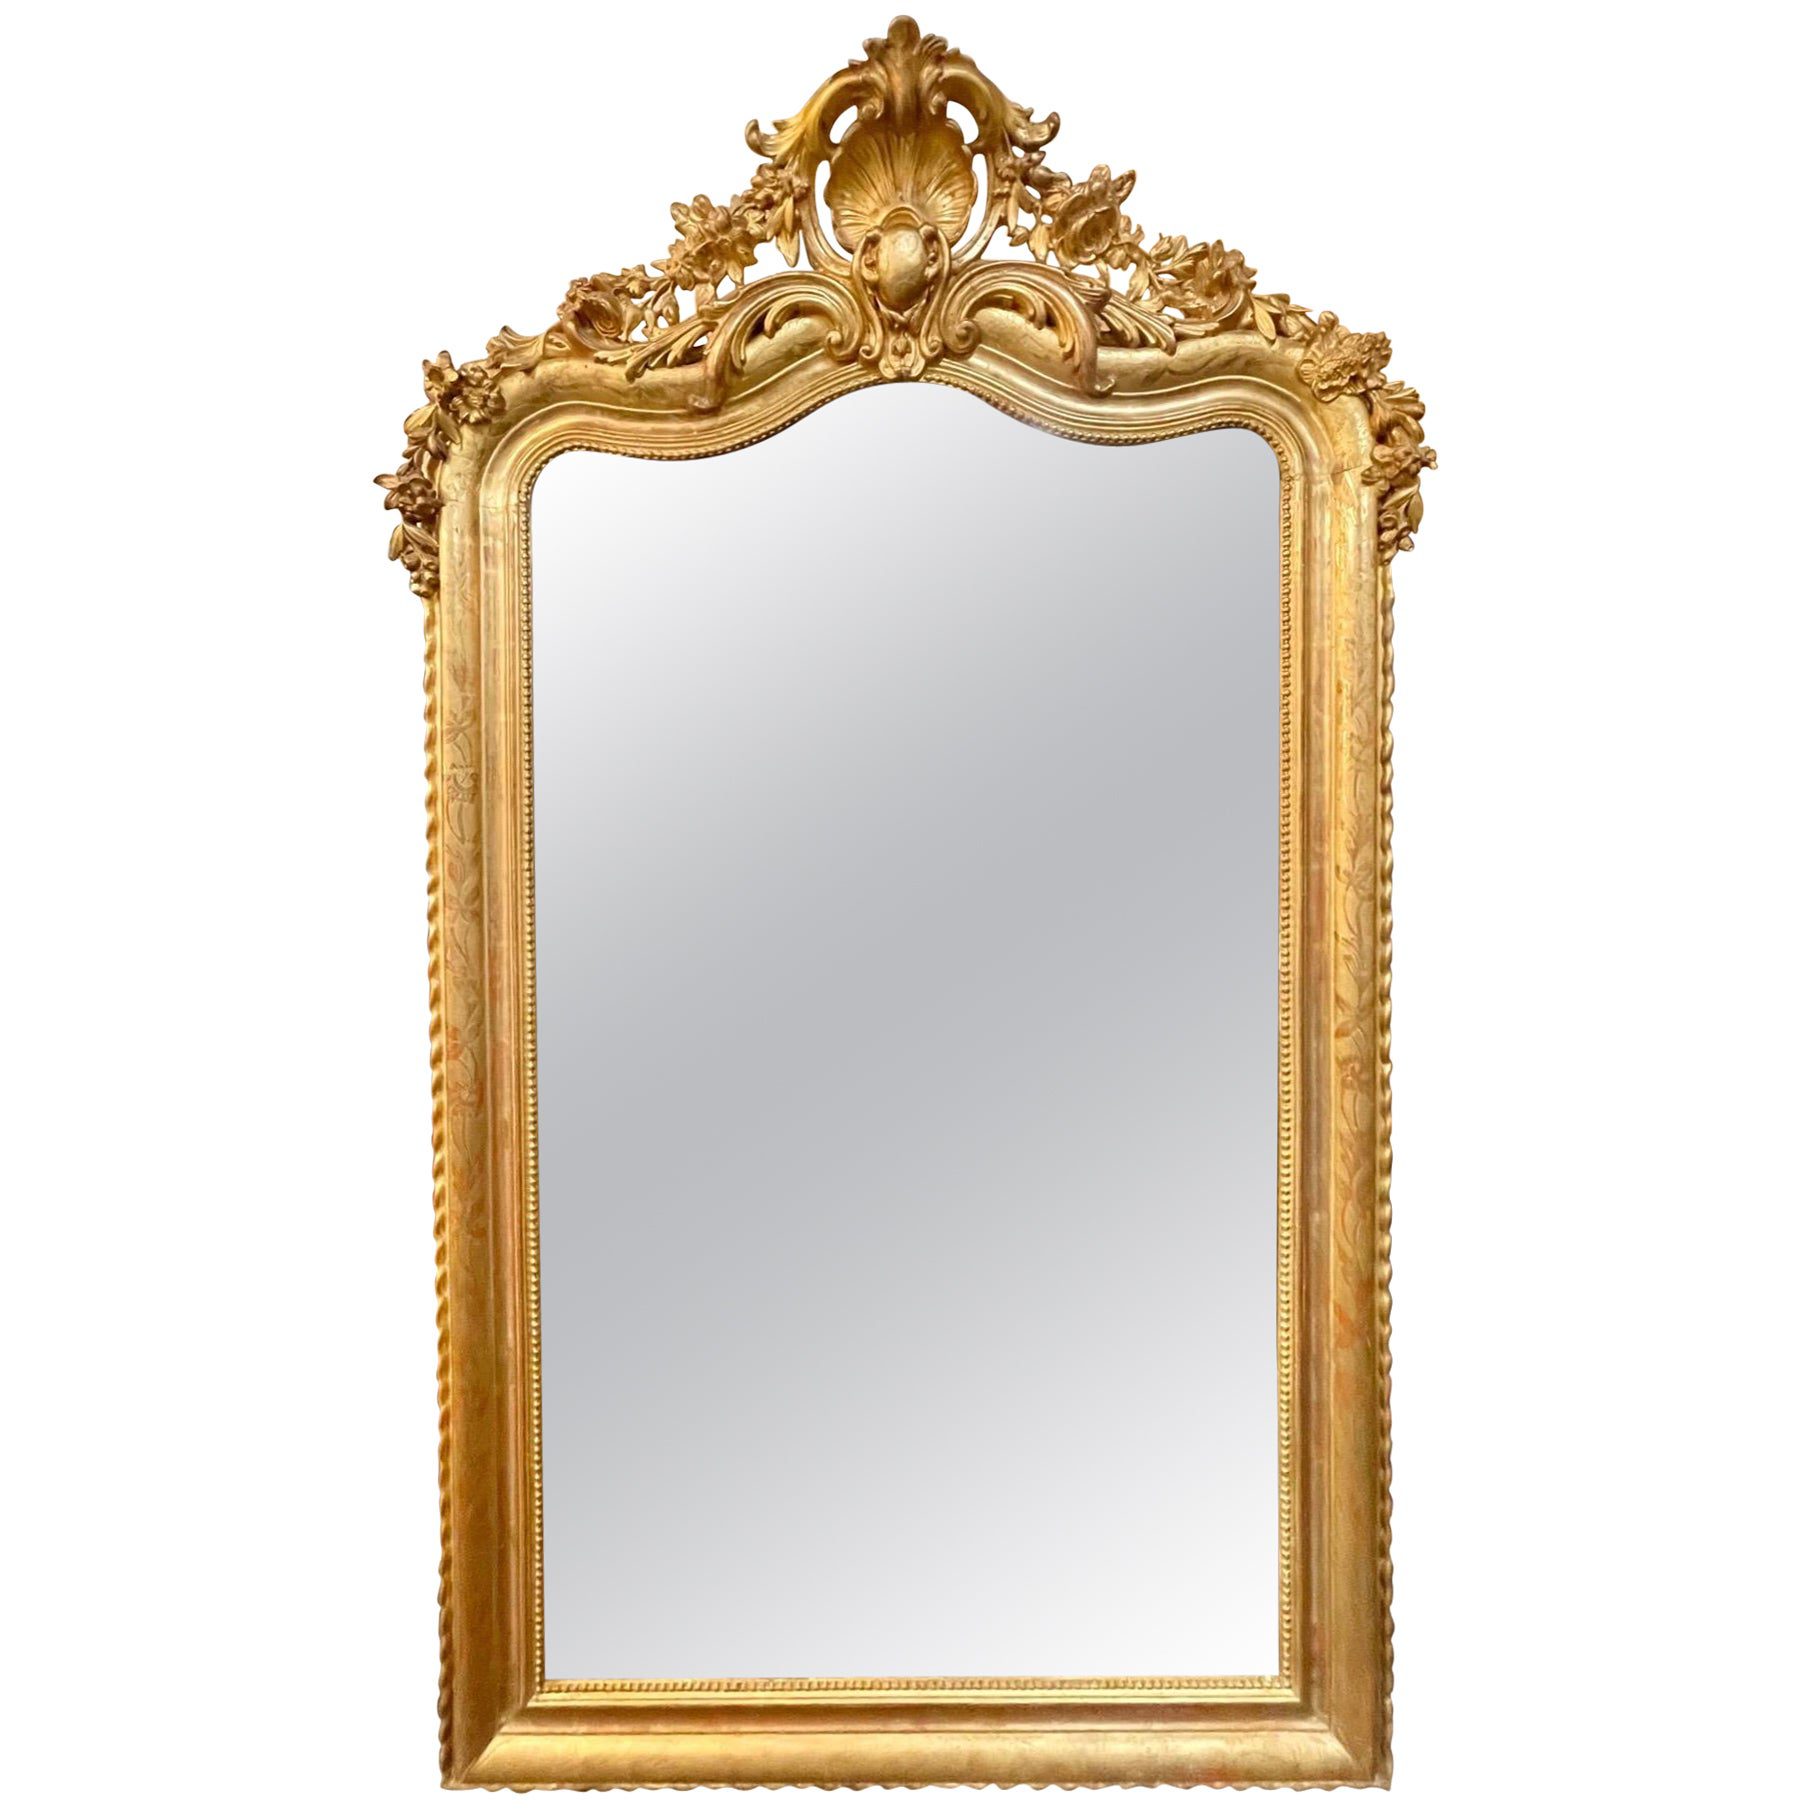 Large 19th Century Louis Philippe Gold Gilt Mirror with Crest for sale at  Pamono